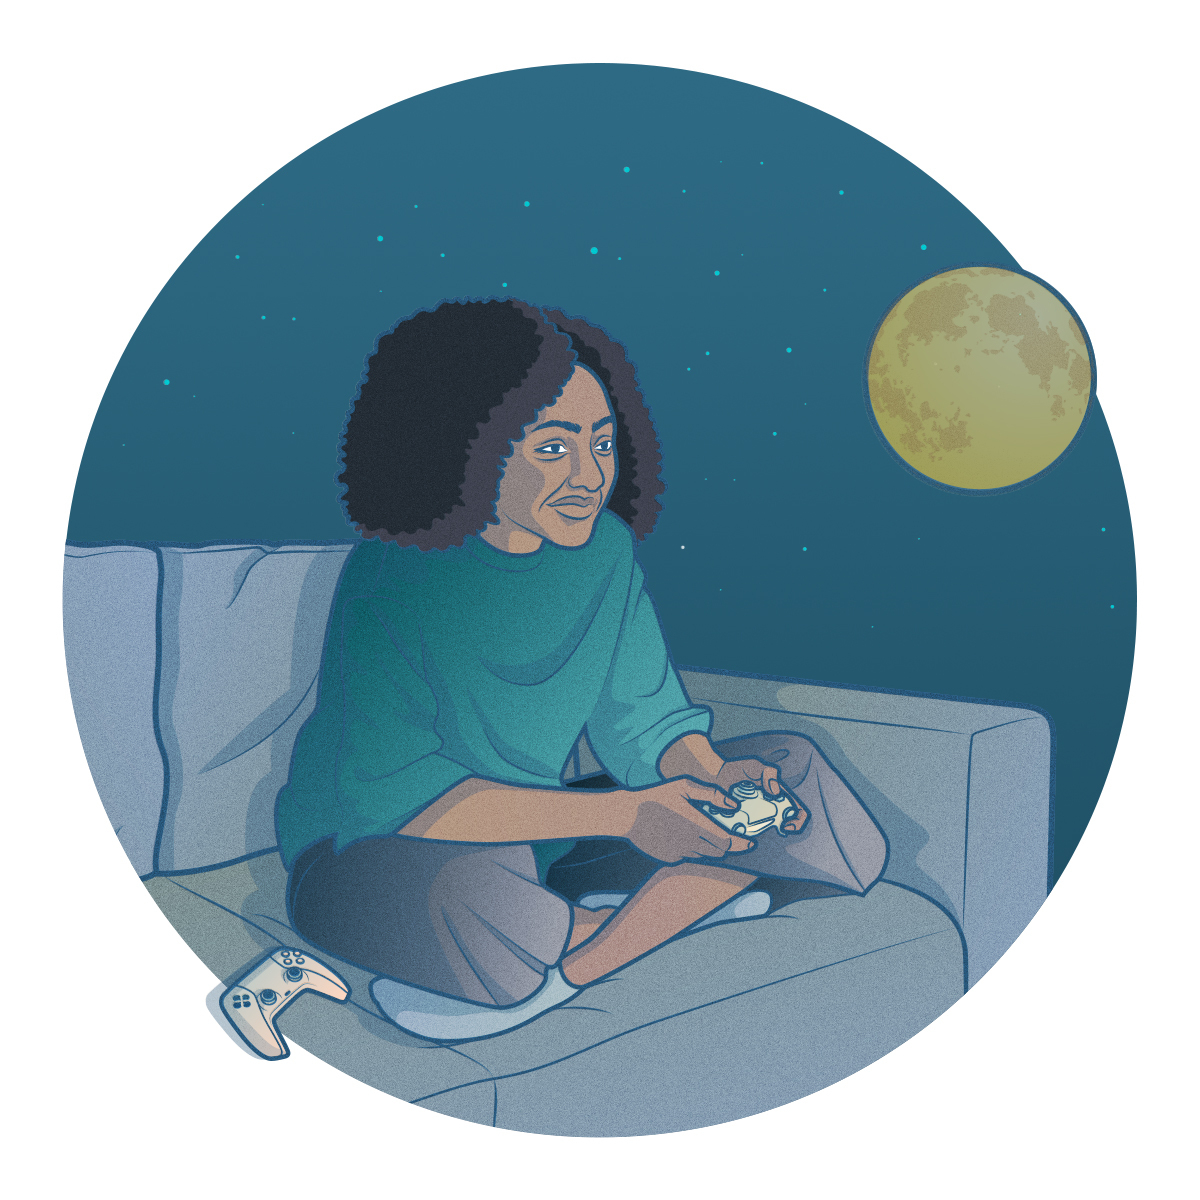 visual of a woman playing video games at night.